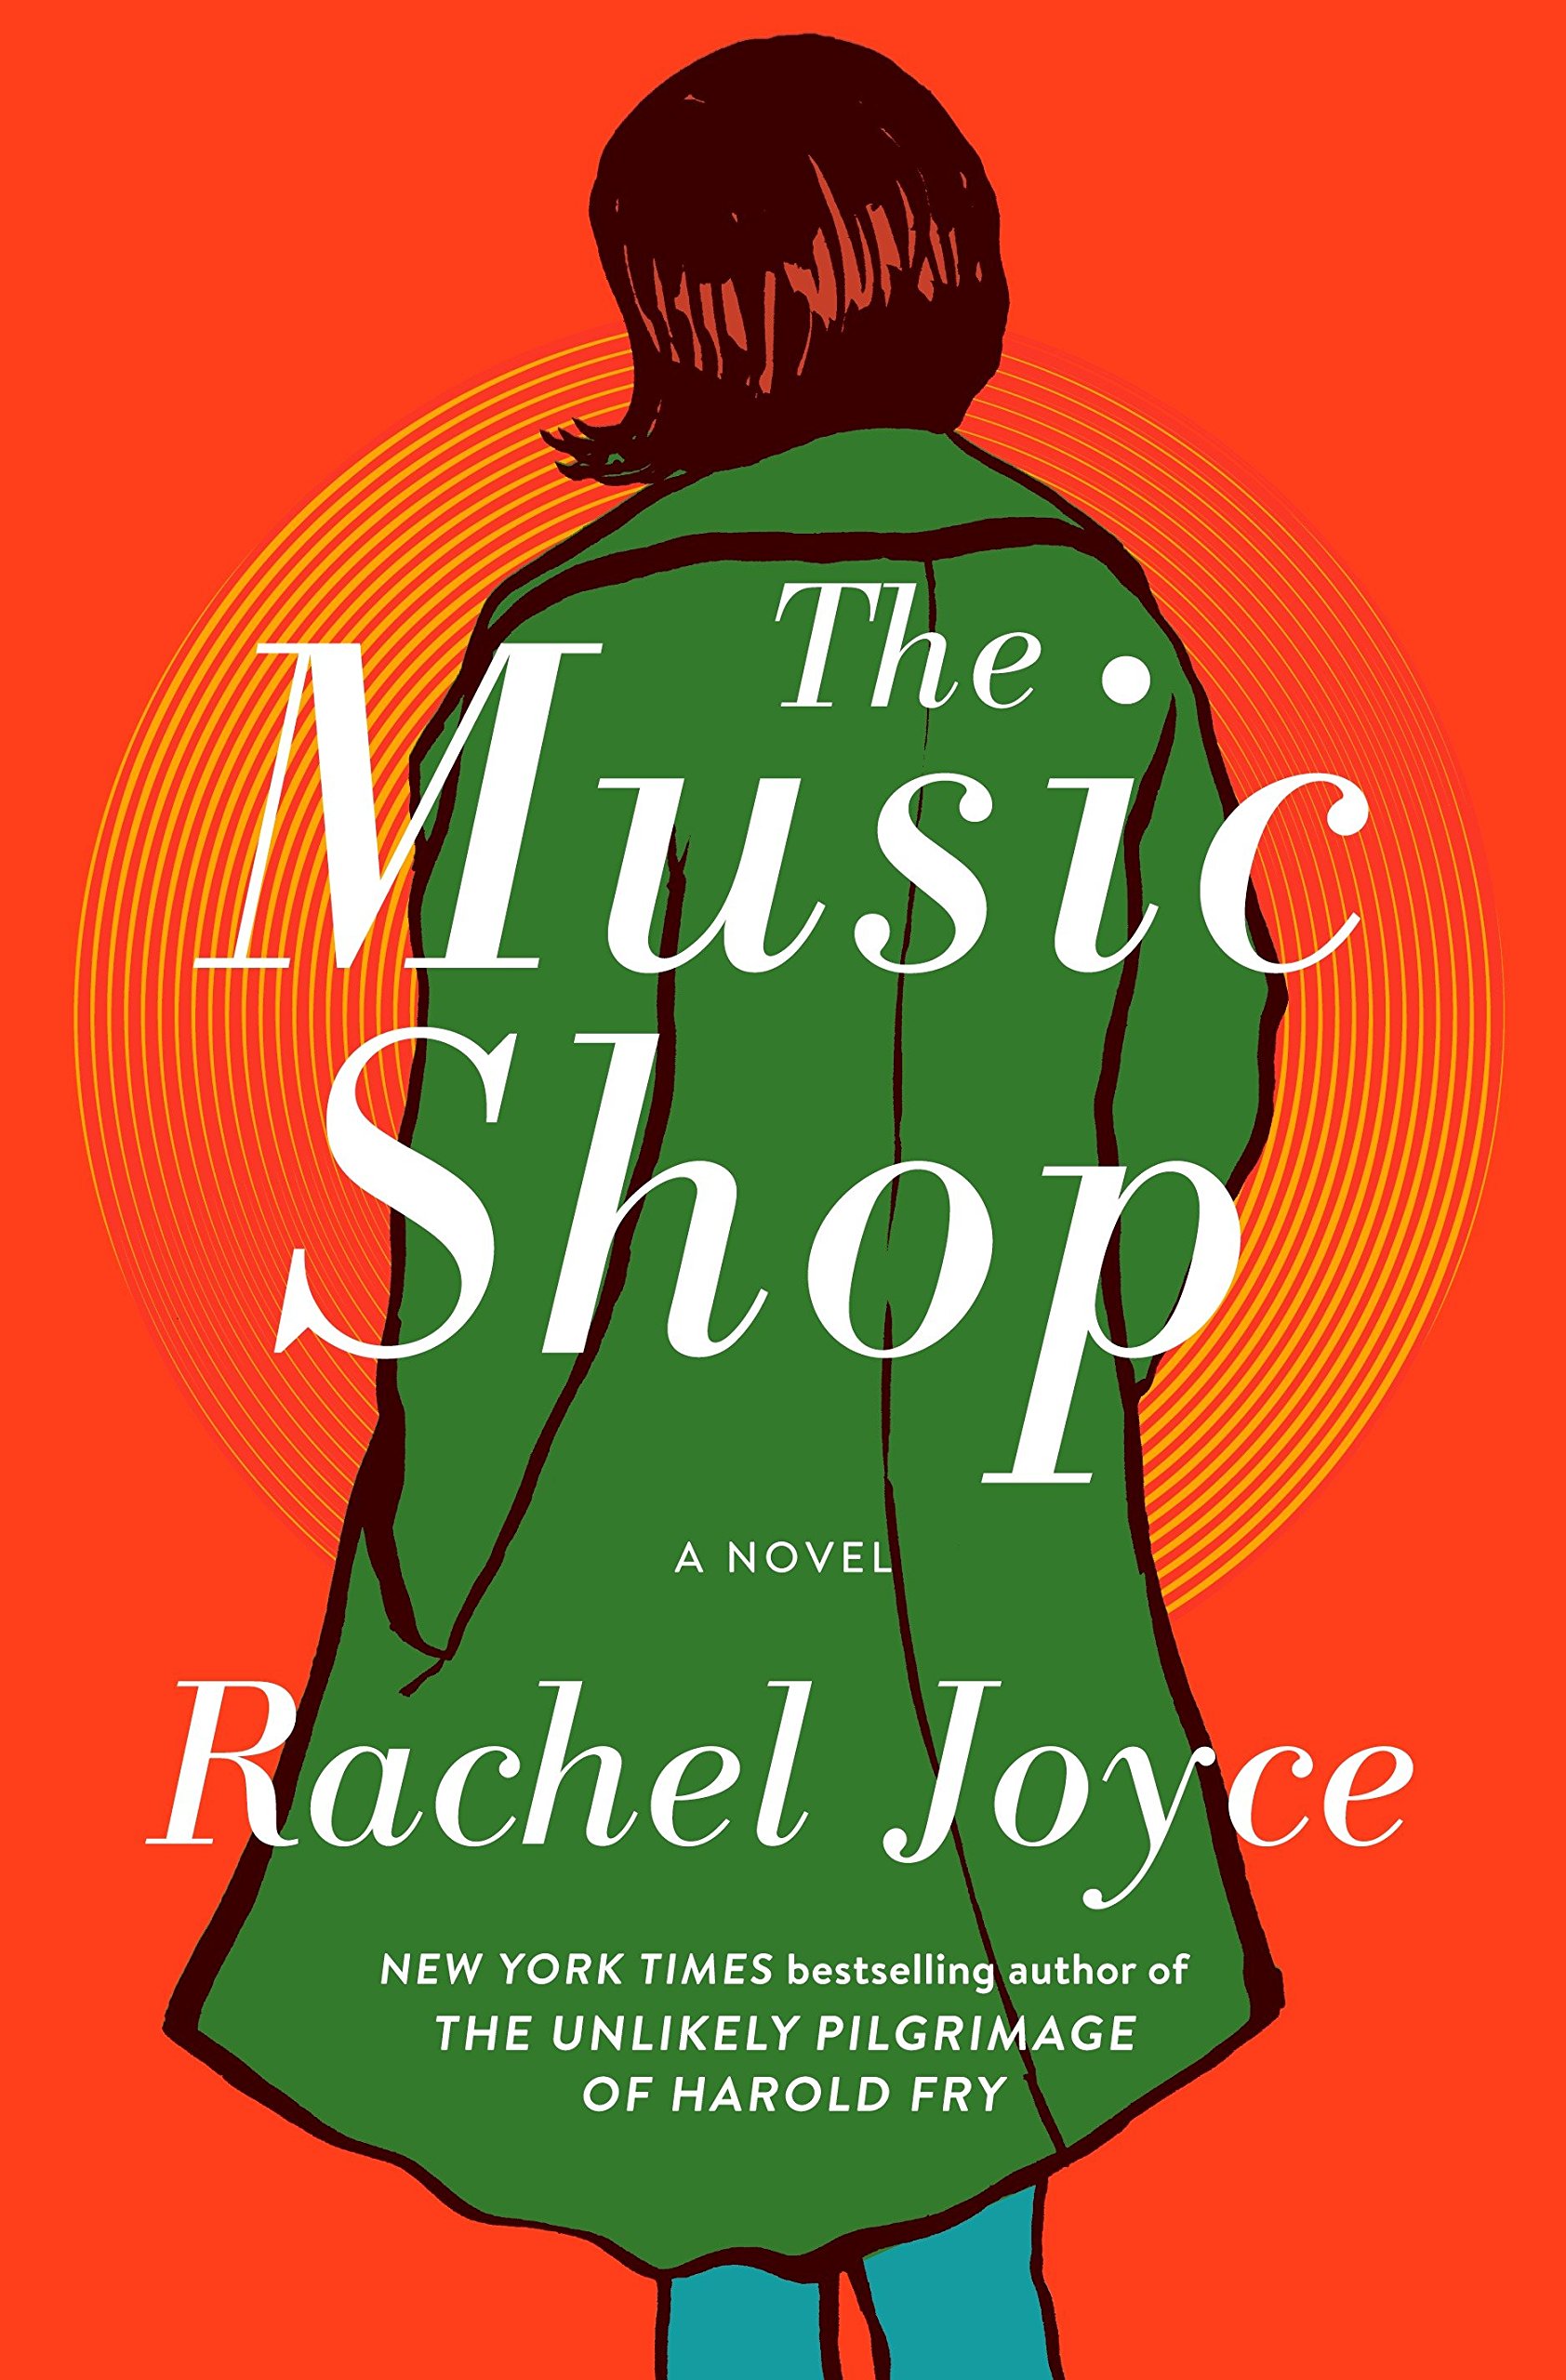 Image for "The Music Shop"